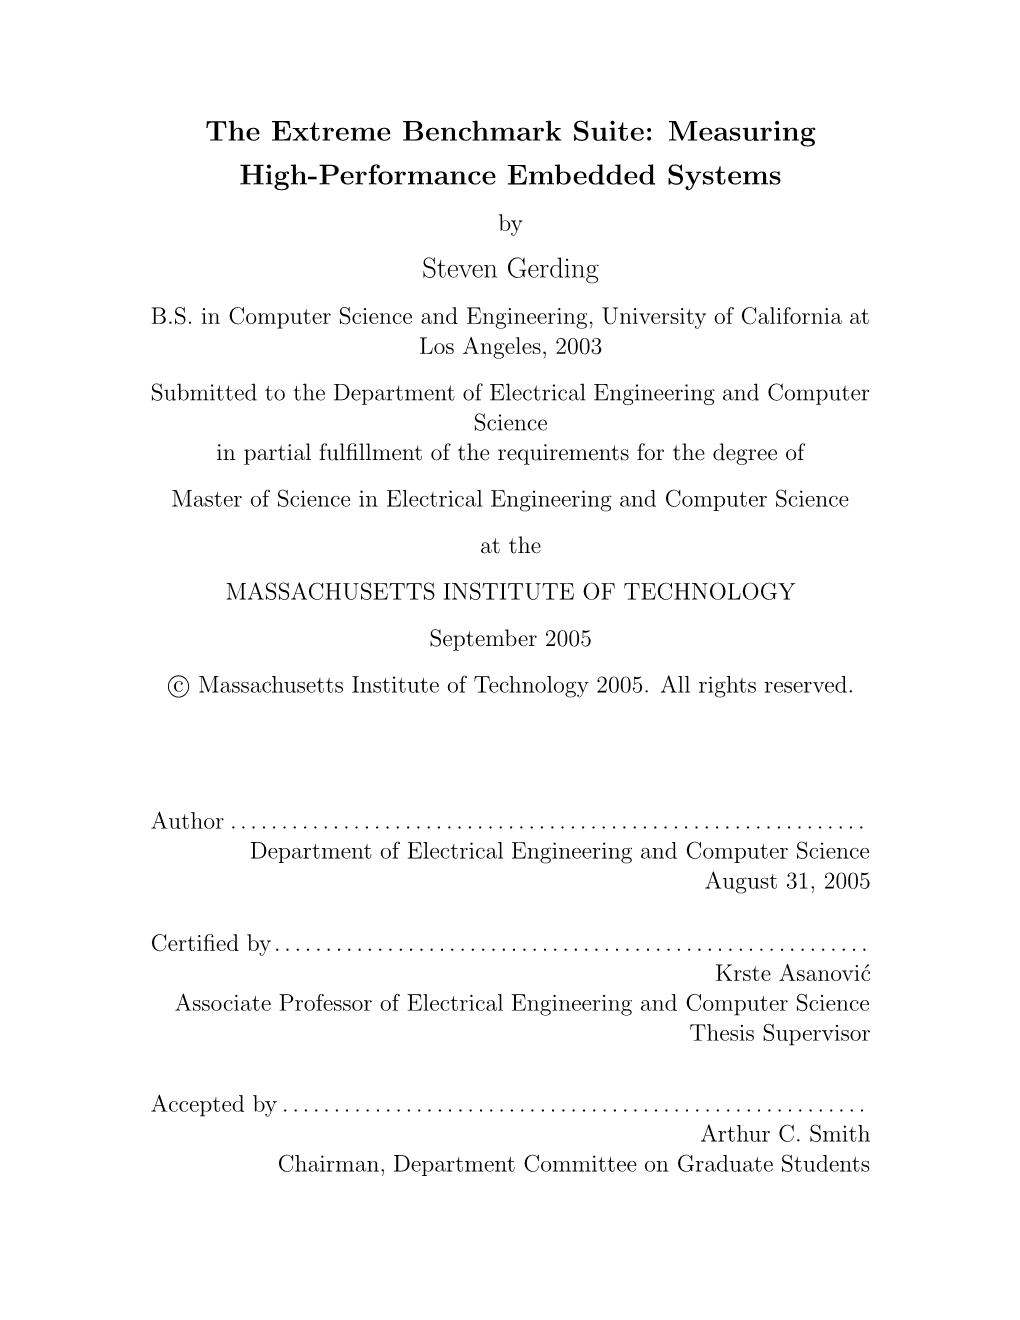 The Extreme Benchmark Suite: Measuring High-Performance Embedded Systems by Steven Gerding B.S